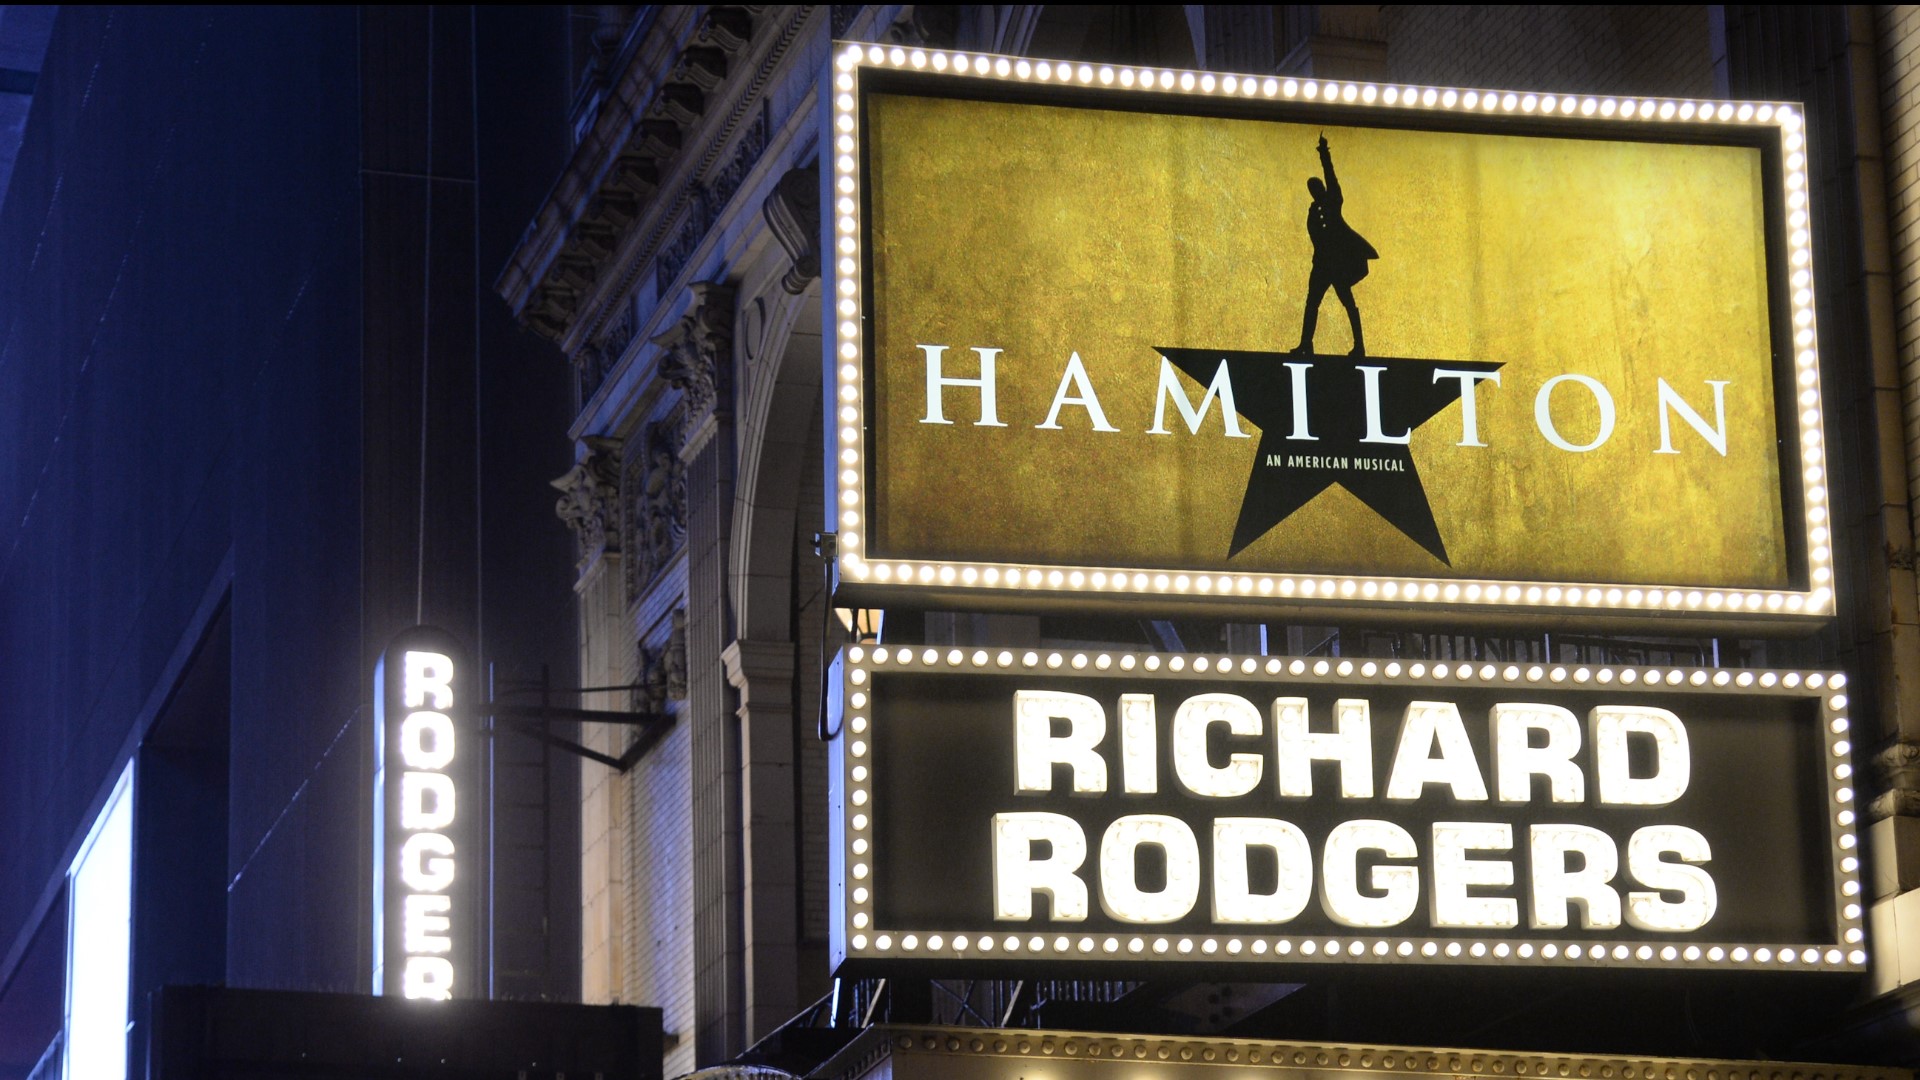 Just you wait 'Hamilton' coming to Spokane in 20202021 Best of